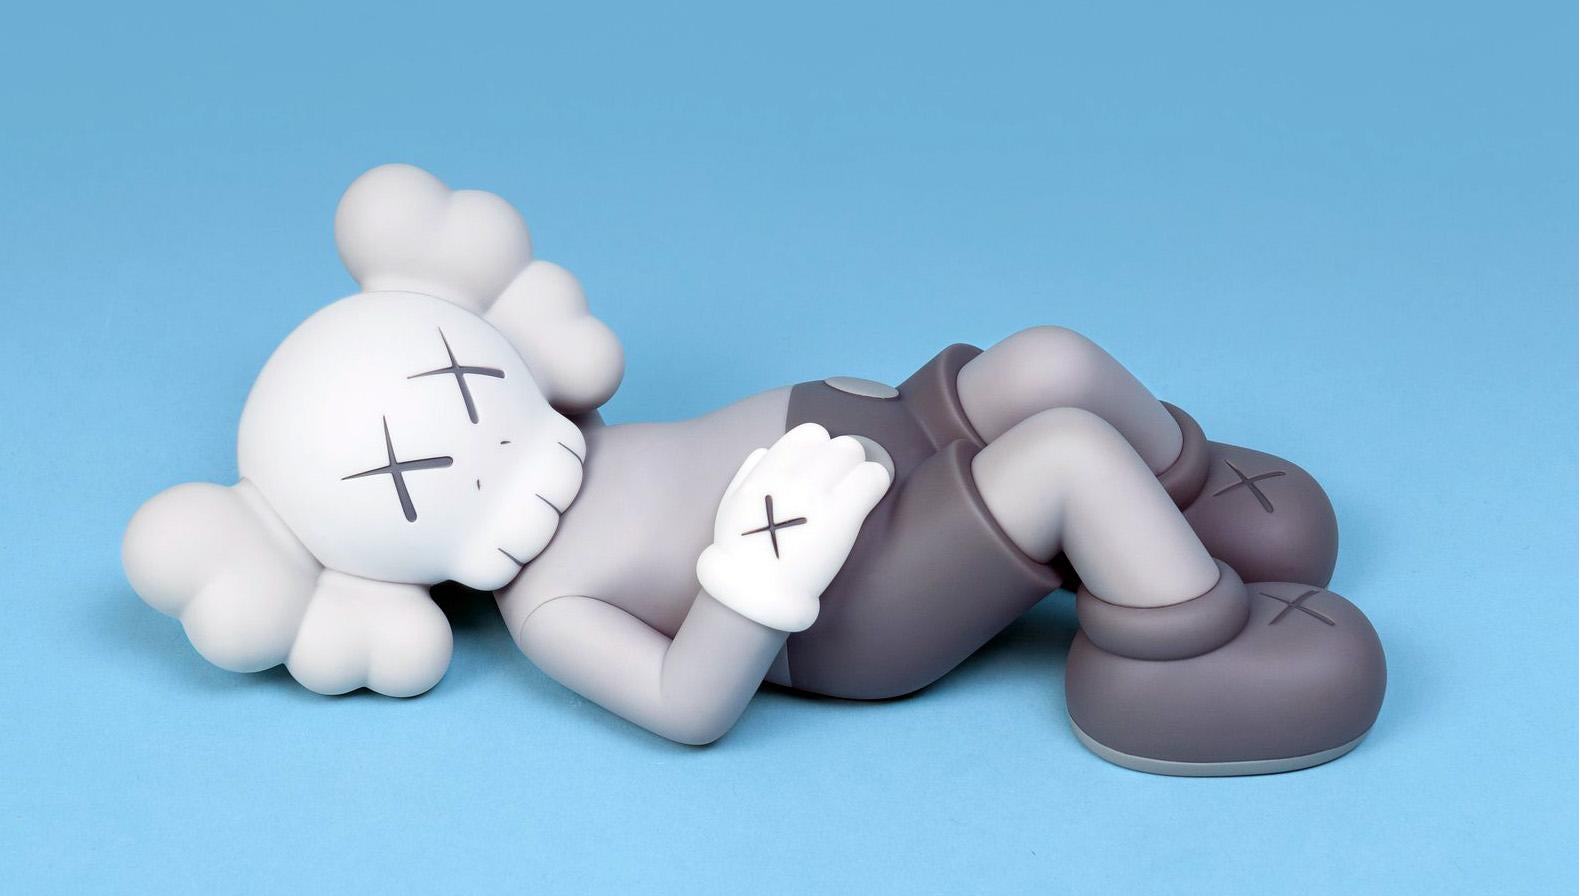 KAWS Holiday Companions: 2019:
A curated set of 3 individual grey KAWS Companions new & unopened in original packaging. Each published in 2019 with additional info as follows:

KAWS Holiday Hong Kong 8.5 x 1.5 inches. Published in conjunction with